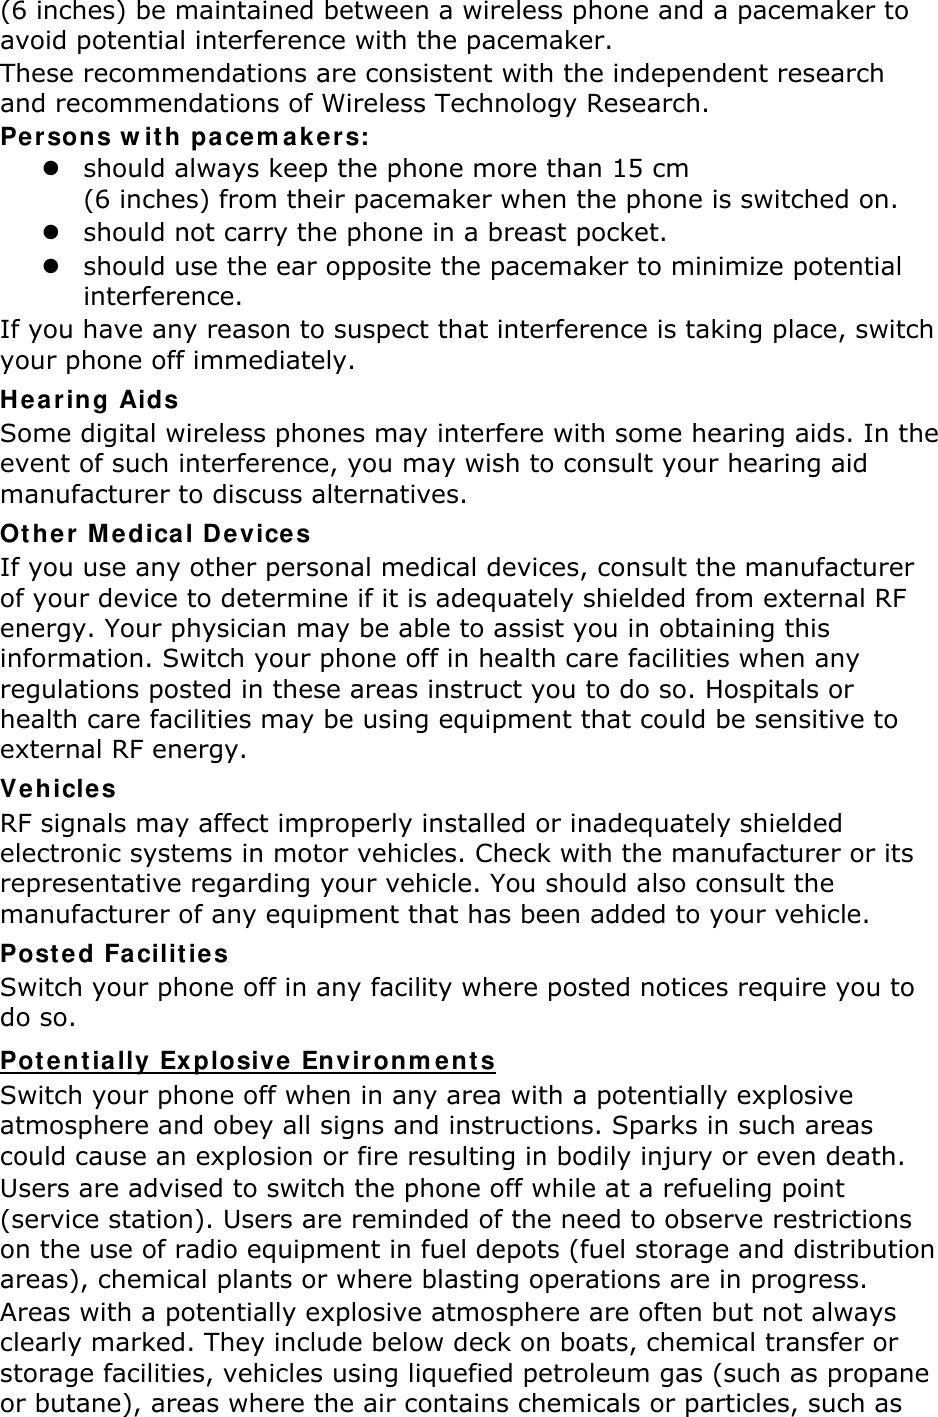 (6 inches) be maintained between a wireless phone and a pacemaker to avoid potential interference with the pacemaker. These recommendations are consistent with the independent research and recommendations of Wireless Technology Research. Persons with pacemakers:  should always keep the phone more than 15 cm   (6 inches) from their pacemaker when the phone is switched on.  should not carry the phone in a breast pocket.  should use the ear opposite the pacemaker to minimize potential interference. If you have any reason to suspect that interference is taking place, switch your phone off immediately. Hearing Aids Some digital wireless phones may interfere with some hearing aids. In the event of such interference, you may wish to consult your hearing aid manufacturer to discuss alternatives. Other Medical Devices If you use any other personal medical devices, consult the manufacturer of your device to determine if it is adequately shielded from external RF energy. Your physician may be able to assist you in obtaining this information. Switch your phone off in health care facilities when any regulations posted in these areas instruct you to do so. Hospitals or health care facilities may be using equipment that could be sensitive to external RF energy. Vehicles RF signals may affect improperly installed or inadequately shielded electronic systems in motor vehicles. Check with the manufacturer or its representative regarding your vehicle. You should also consult the manufacturer of any equipment that has been added to your vehicle. Posted Facilities Switch your phone off in any facility where posted notices require you to do so. Potentially Explosive Environments Switch your phone off when in any area with a potentially explosive atmosphere and obey all signs and instructions. Sparks in such areas could cause an explosion or fire resulting in bodily injury or even death. Users are advised to switch the phone off while at a refueling point (service station). Users are reminded of the need to observe restrictions on the use of radio equipment in fuel depots (fuel storage and distribution areas), chemical plants or where blasting operations are in progress. Areas with a potentially explosive atmosphere are often but not always clearly marked. They include below deck on boats, chemical transfer or storage facilities, vehicles using liquefied petroleum gas (such as propane or butane), areas where the air contains chemicals or particles, such as 